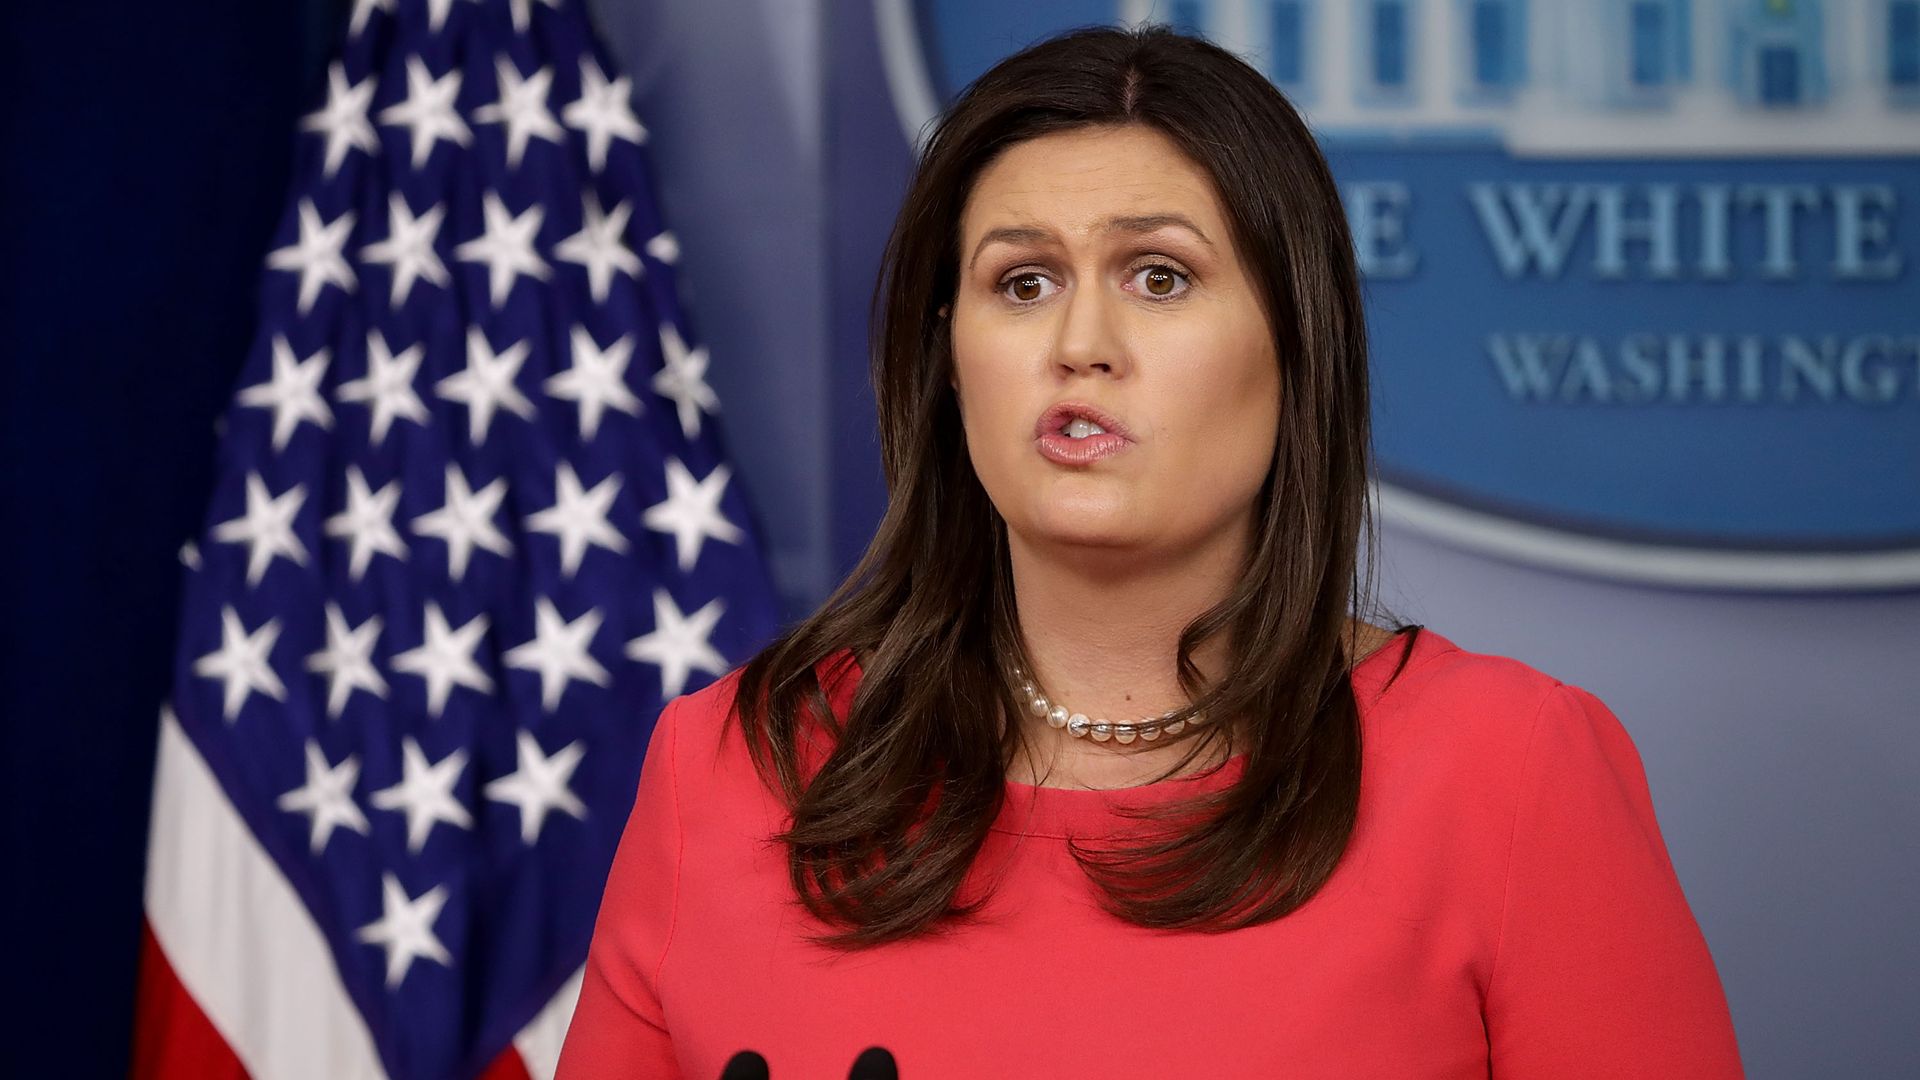 Sarah Sanders talking at the podium in a red suit